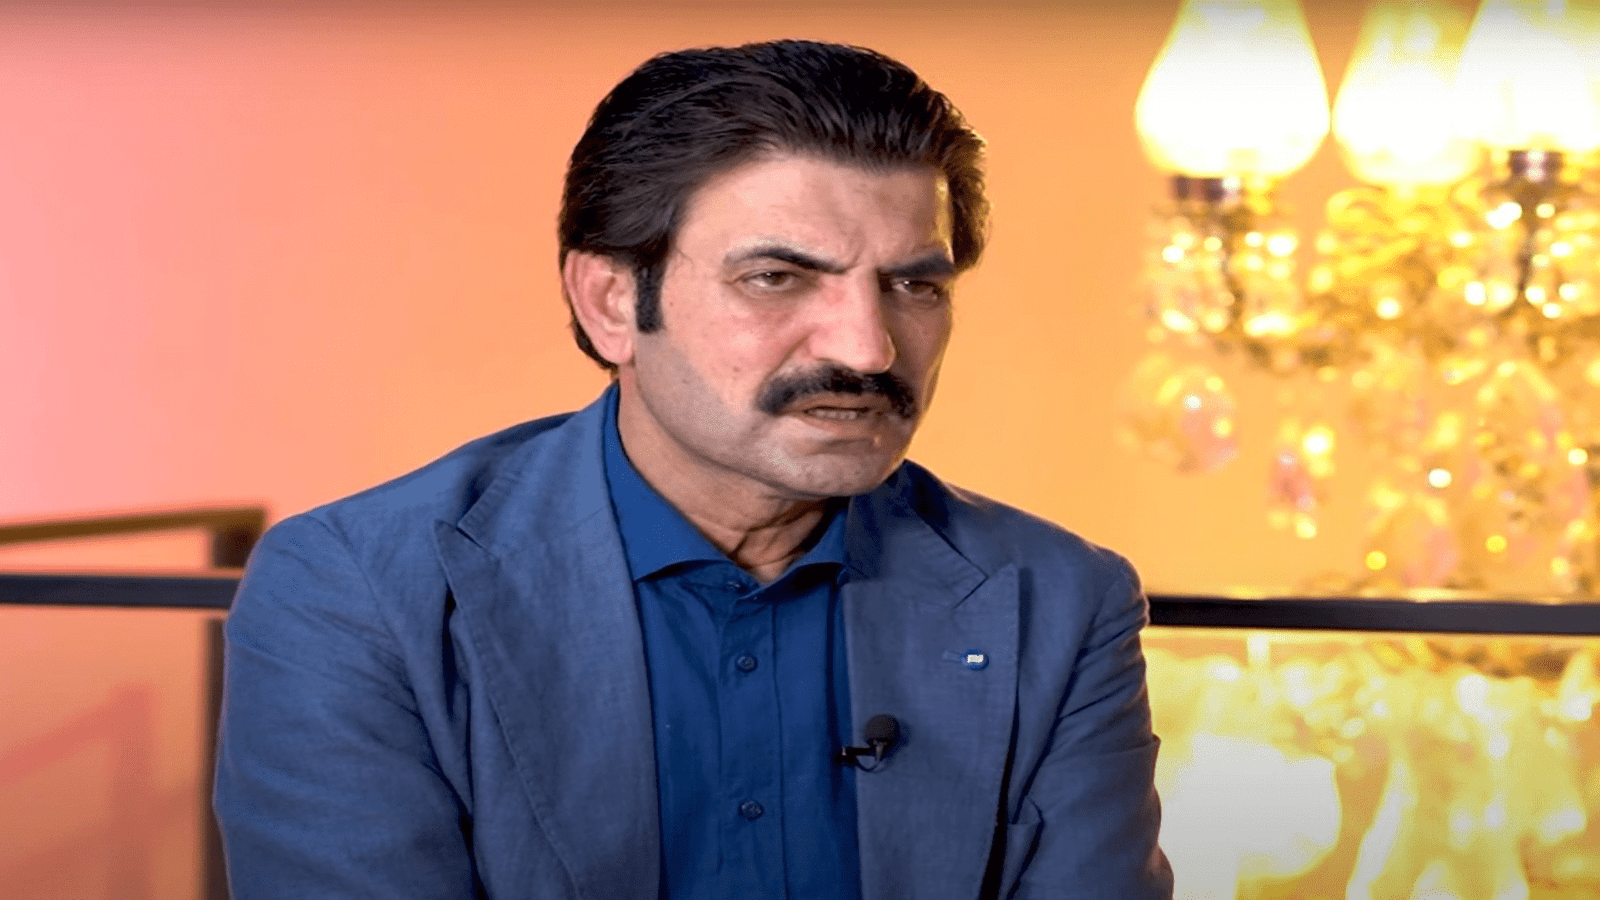 PTI leader Marwat lashes out at party leadership again